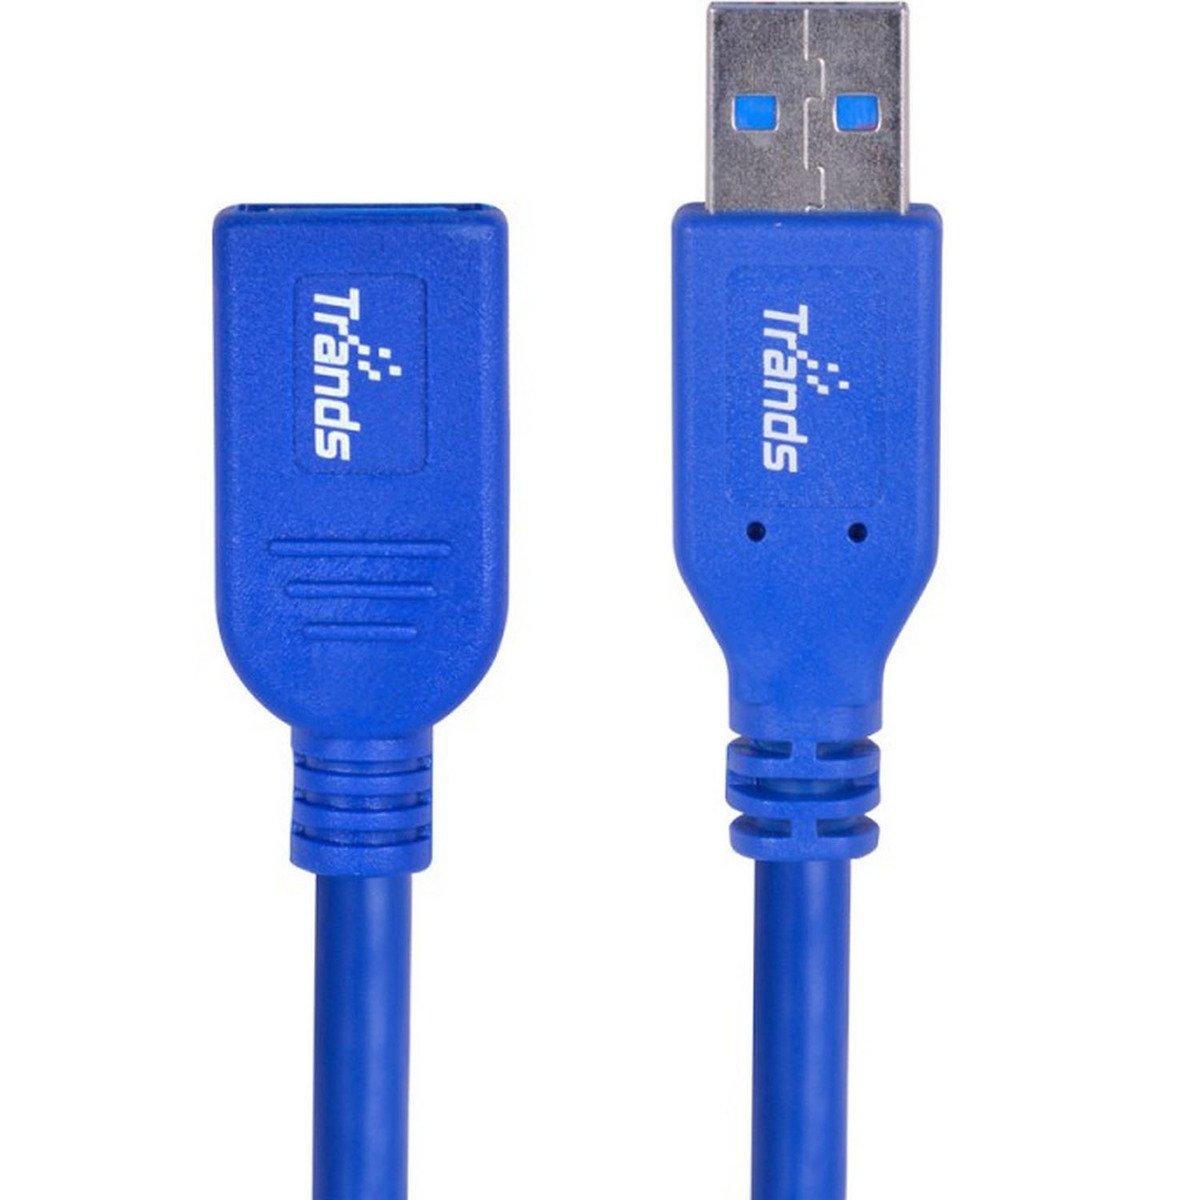 Trands USB3USB 3.0 Extension Cable TRCA101 3Meter